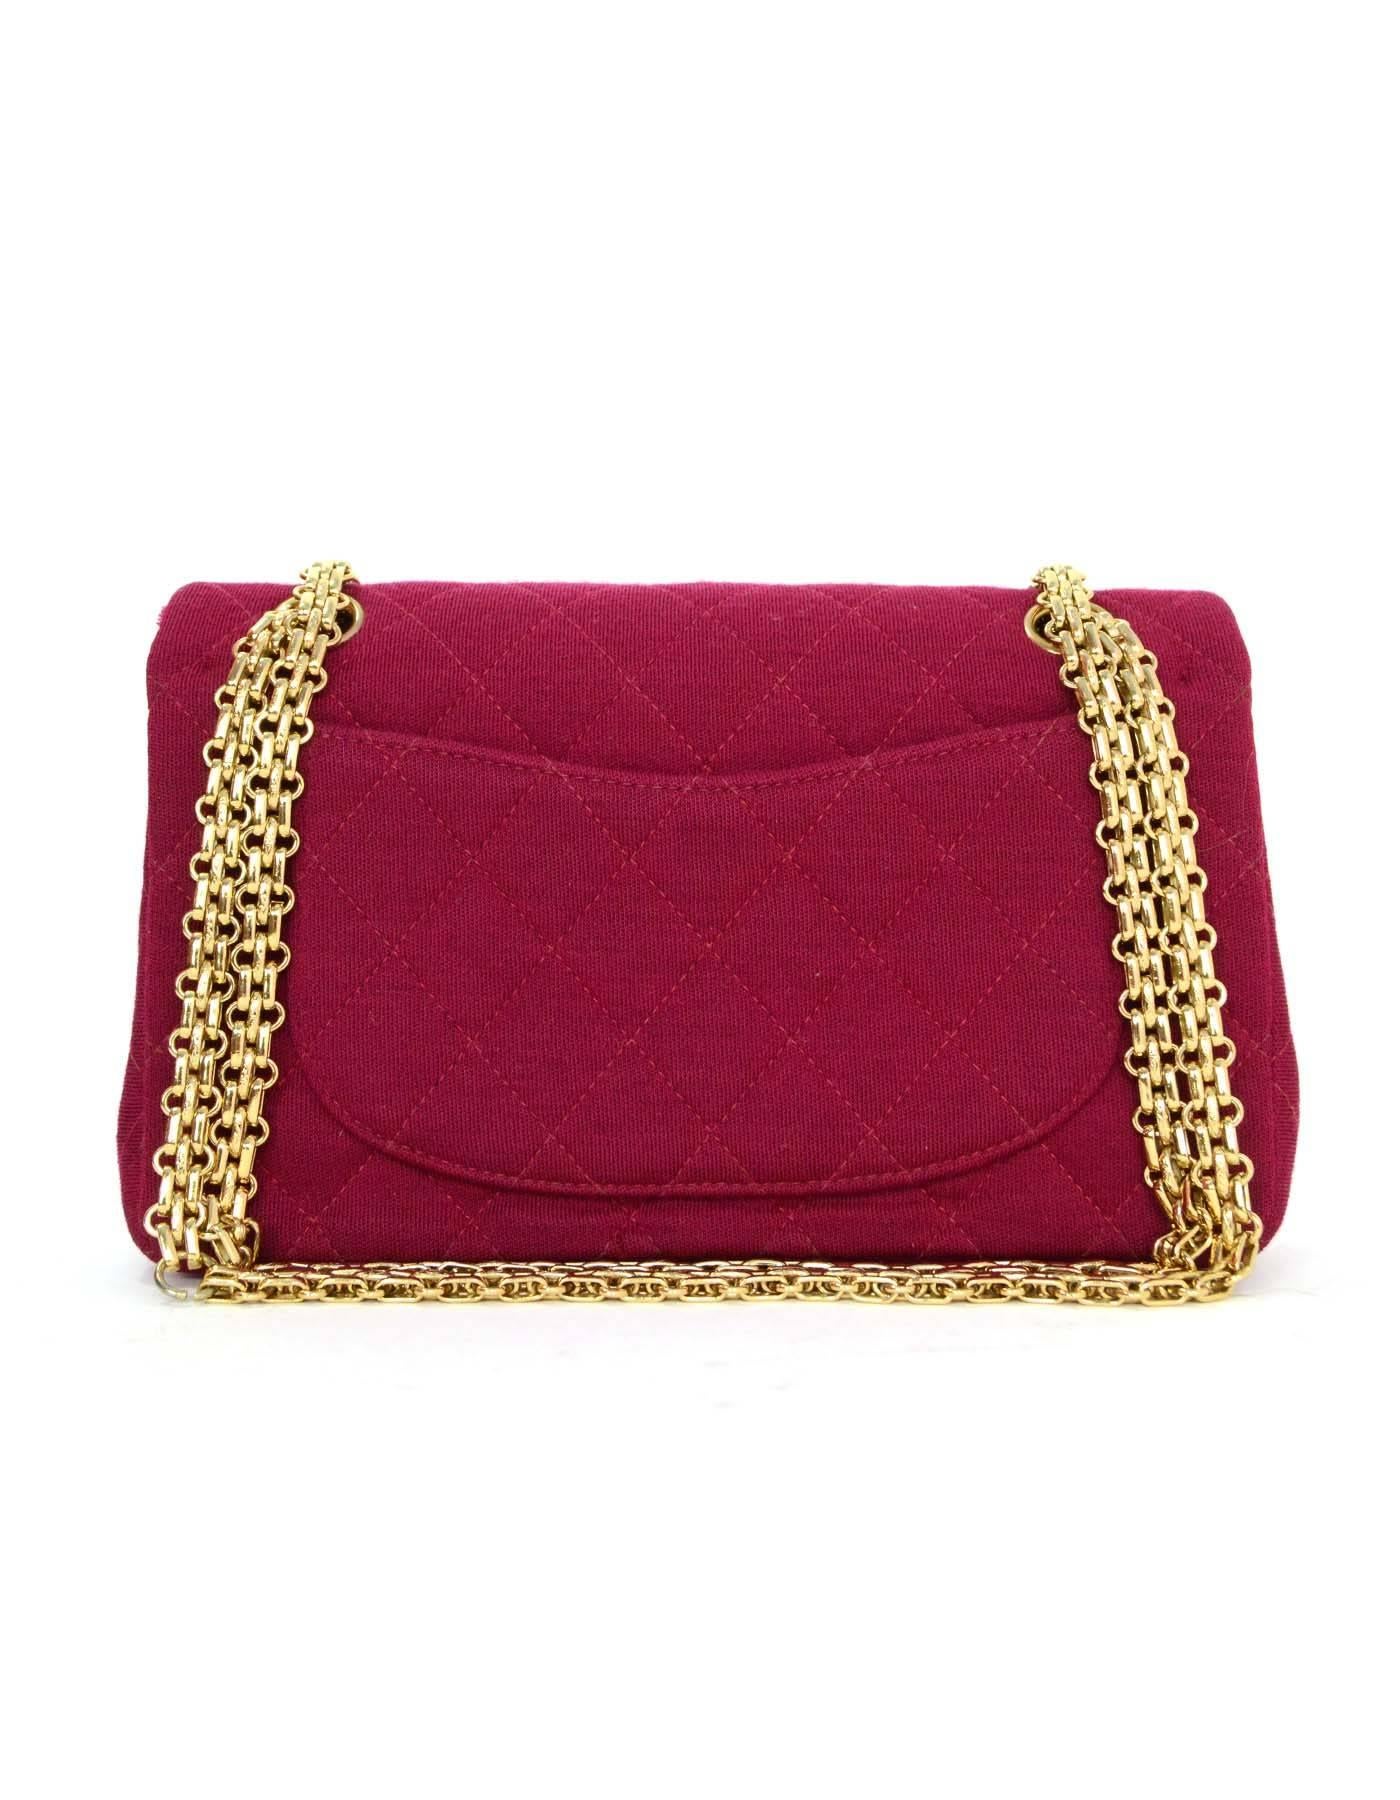 Chanel Burgundy Jersey Double Flap Small Classic Bag GHW
Features adjustable mademoiselle chain shoulder straps

Made In: France
Year of Production: 2002
Color: Burgundy
Hardware: Goldtones
Materials: Jersey textile
Lining: Burgundy